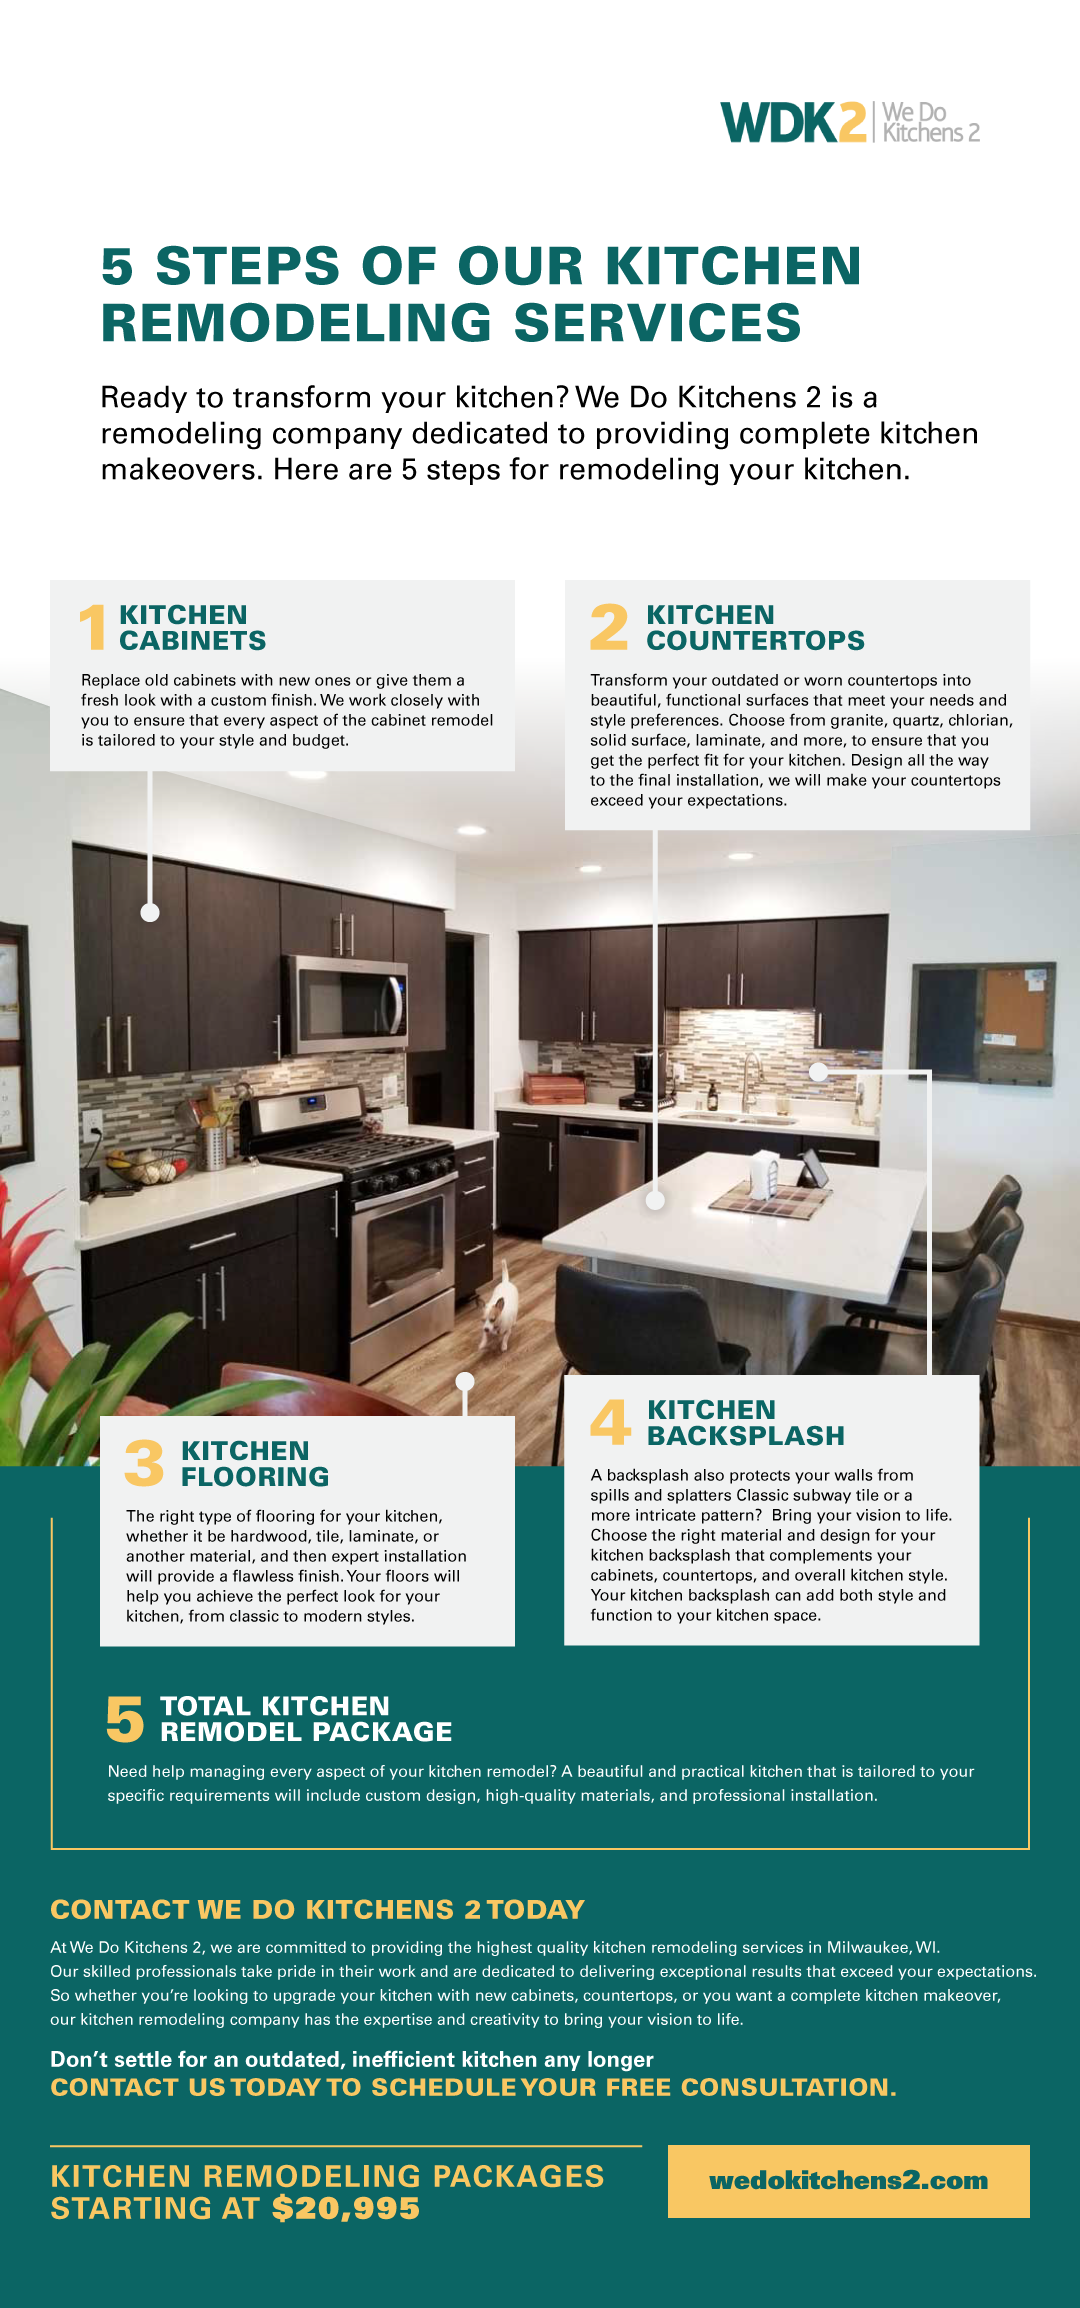 5 steps of their kitchen remodeling package